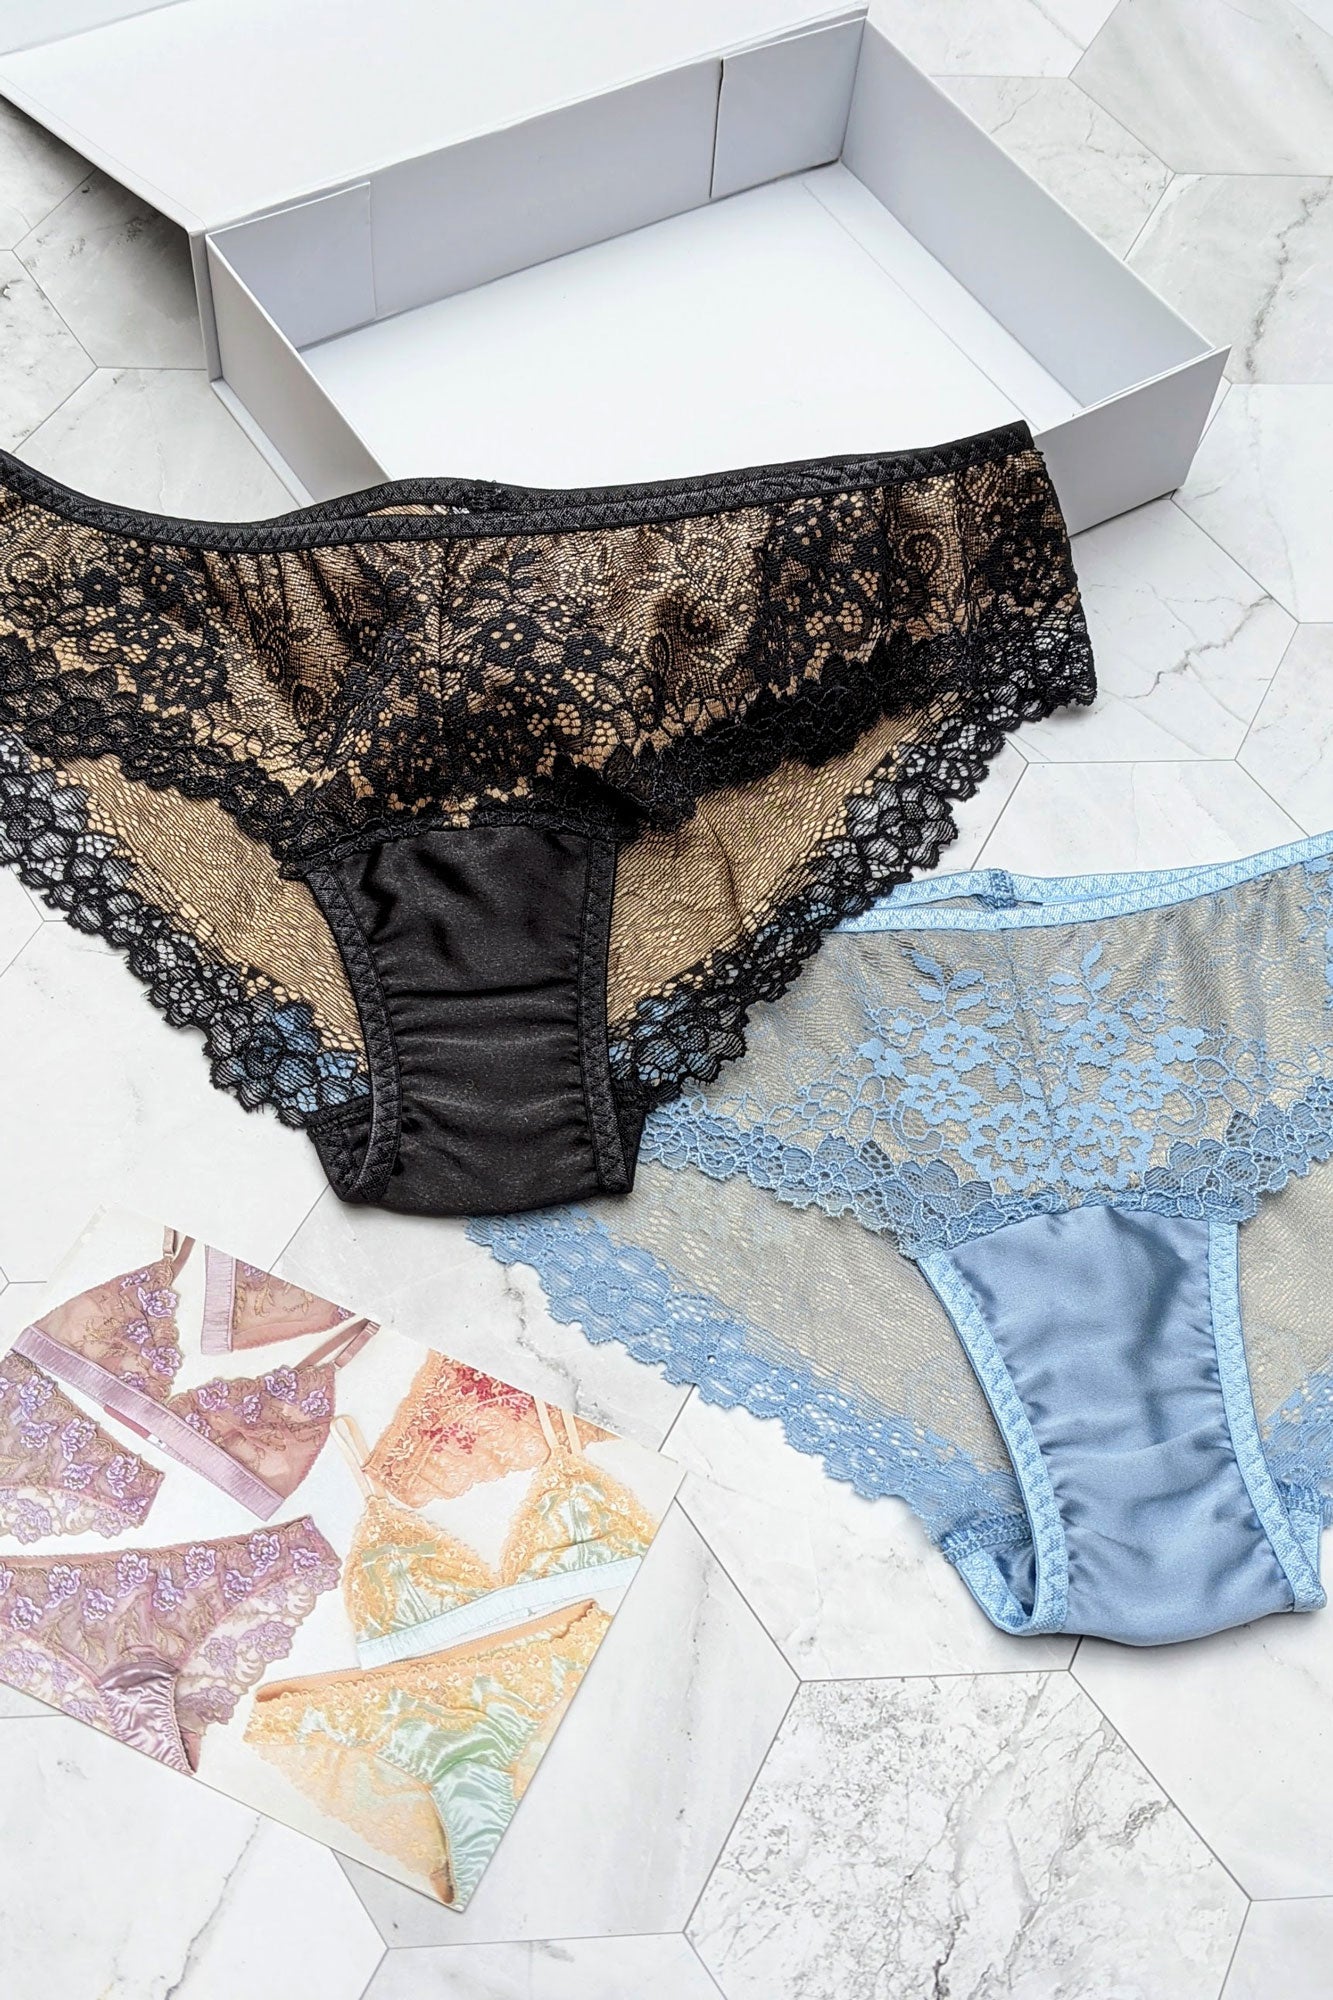 Luxury lingerie set in blue silk and black lace with magenetic gift boxes